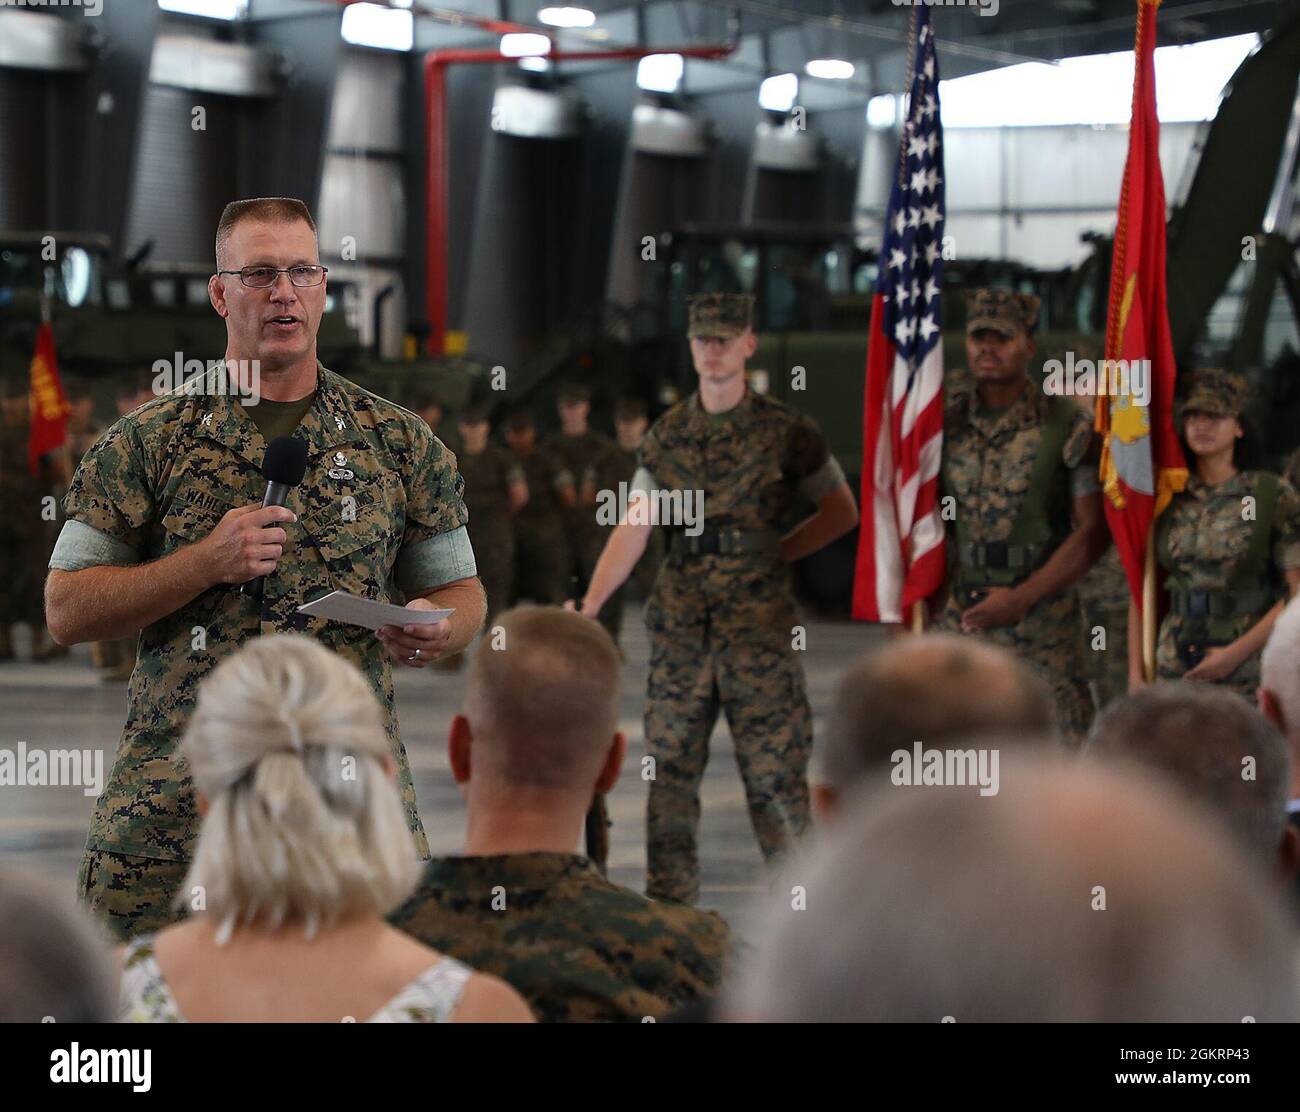 https://c8.alamy.com/comp/2GKRP43/col-kipp-a-wahlgren-right-outgoing-commanding-officer-marine-force-storage-command-addresses-attendees-during-mfscs-change-of-command-ceremony-at-marine-corps-logistics-base-albany-ga-june-23-2GKRP43.jpg